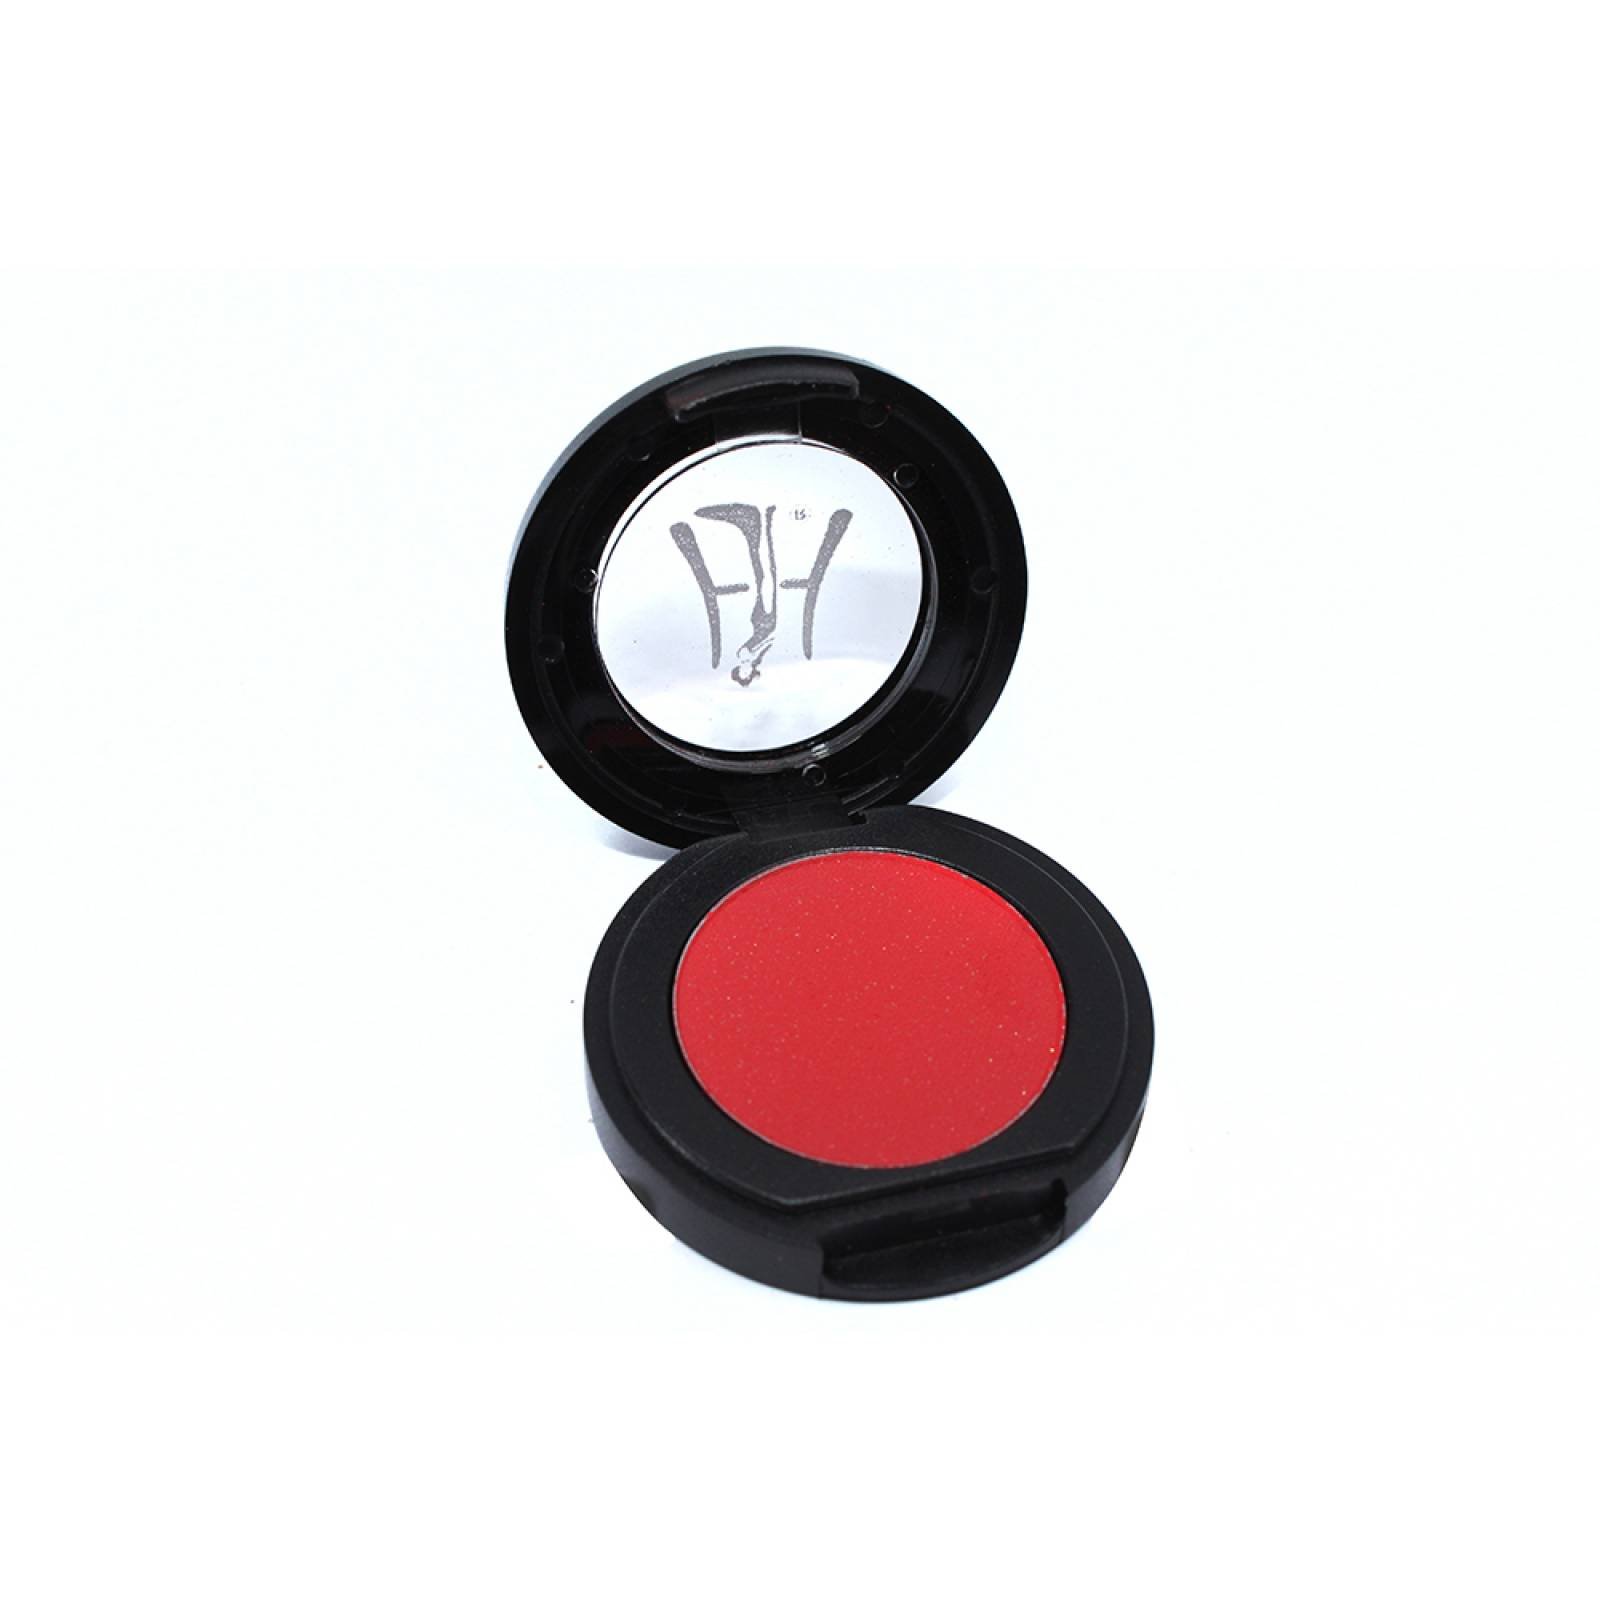 Sombra Ojos Mineral Compacta 1.5 grs Hollywood Image HOT SPARK